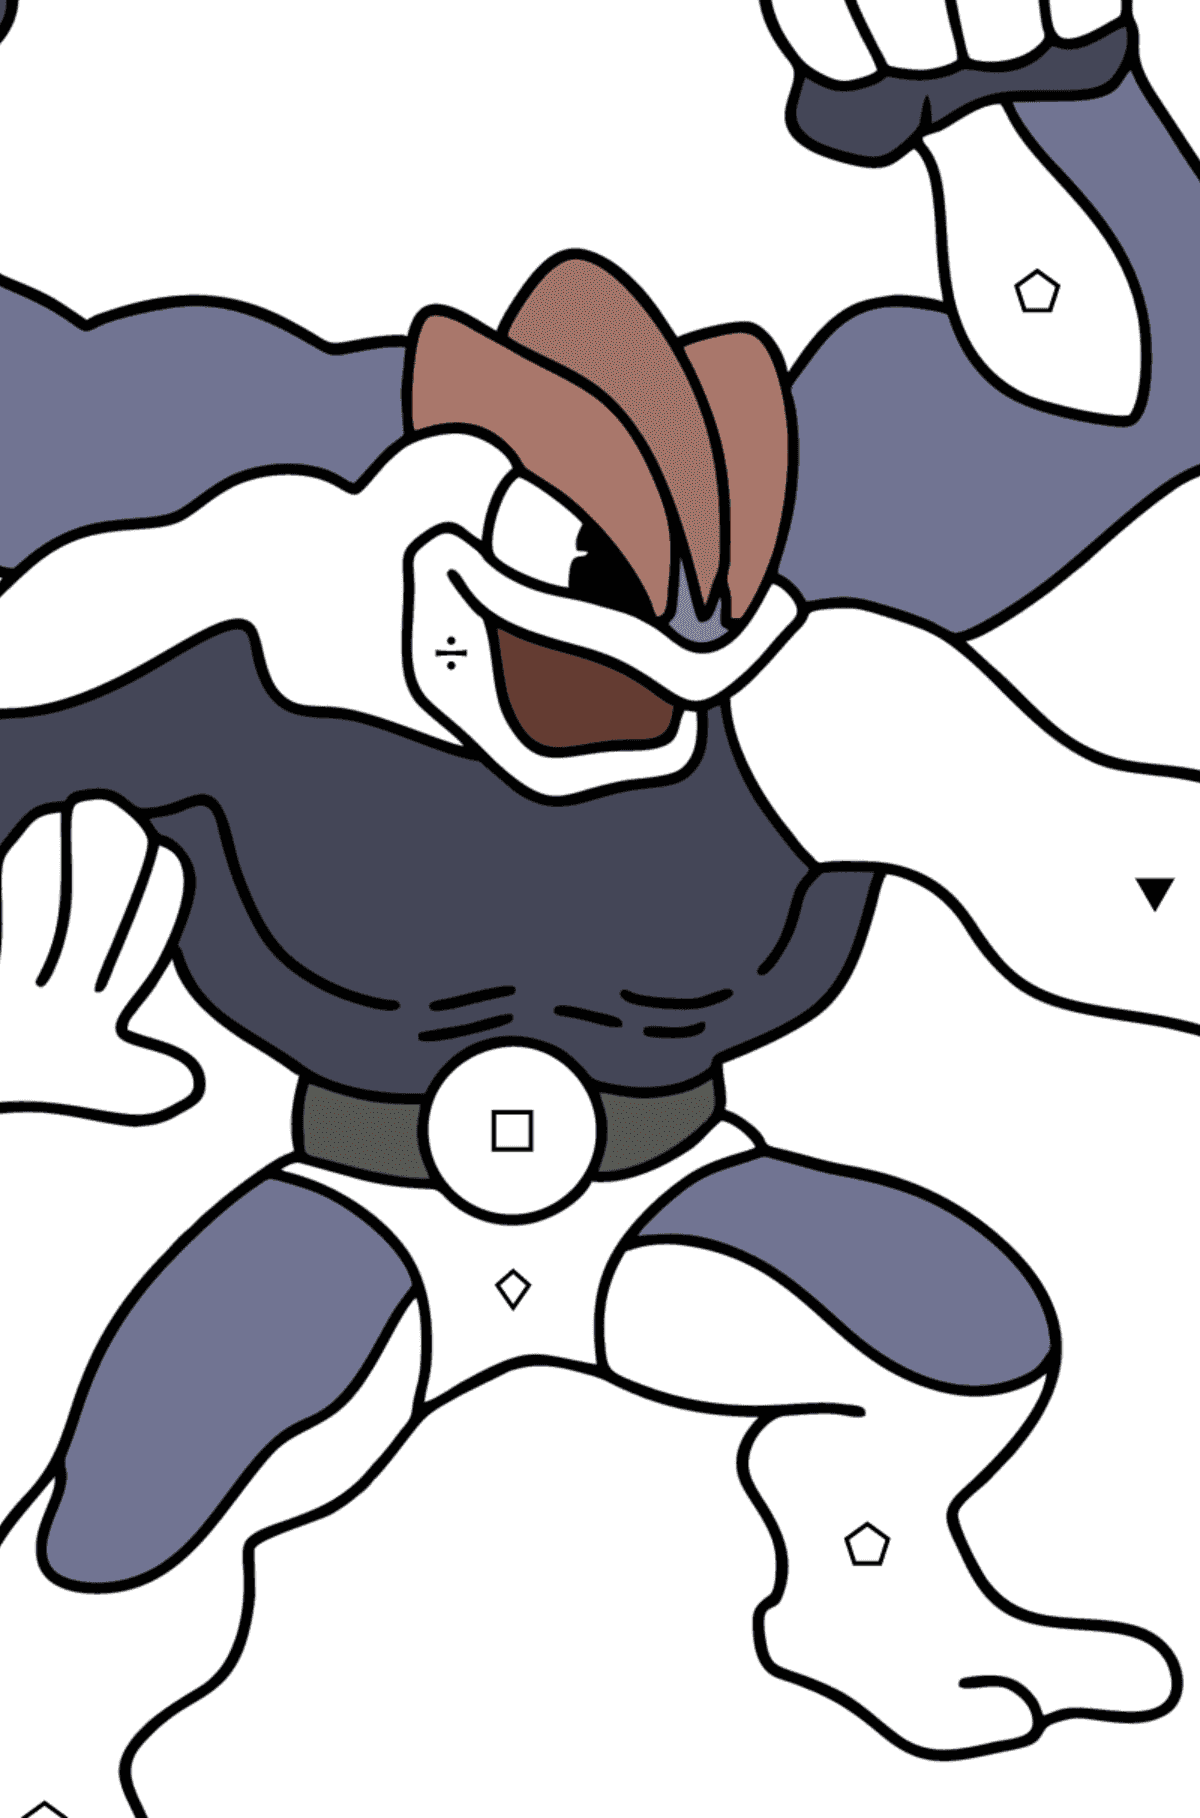 Coloring page Pokemon Go Machamp - Coloring by Symbols and Geometric Shapes for Kids